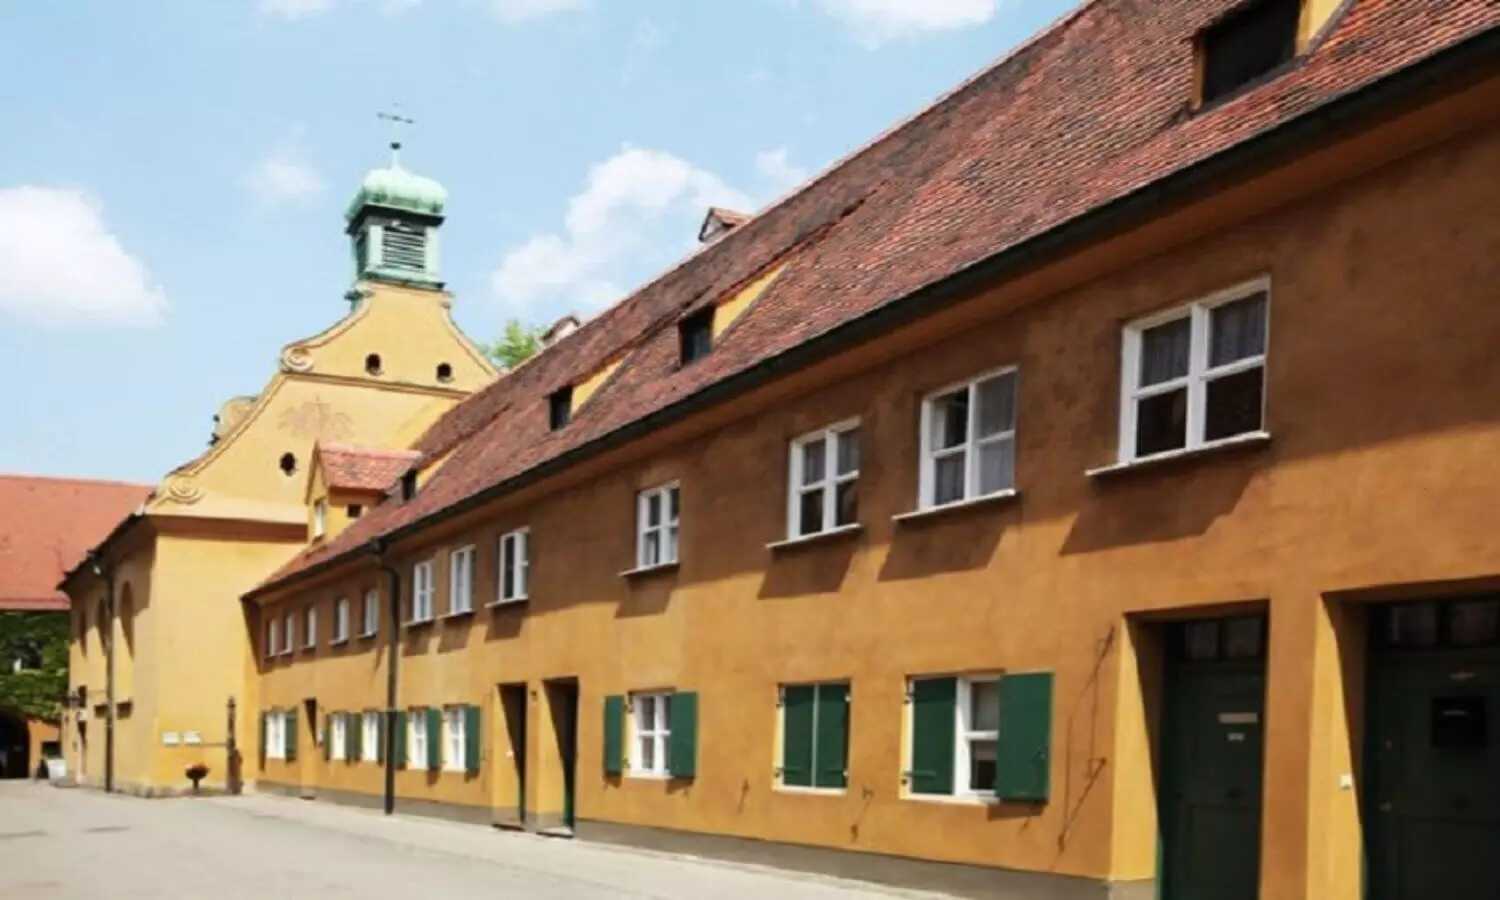 The Fuggerei housing complex , Photo taken from social media